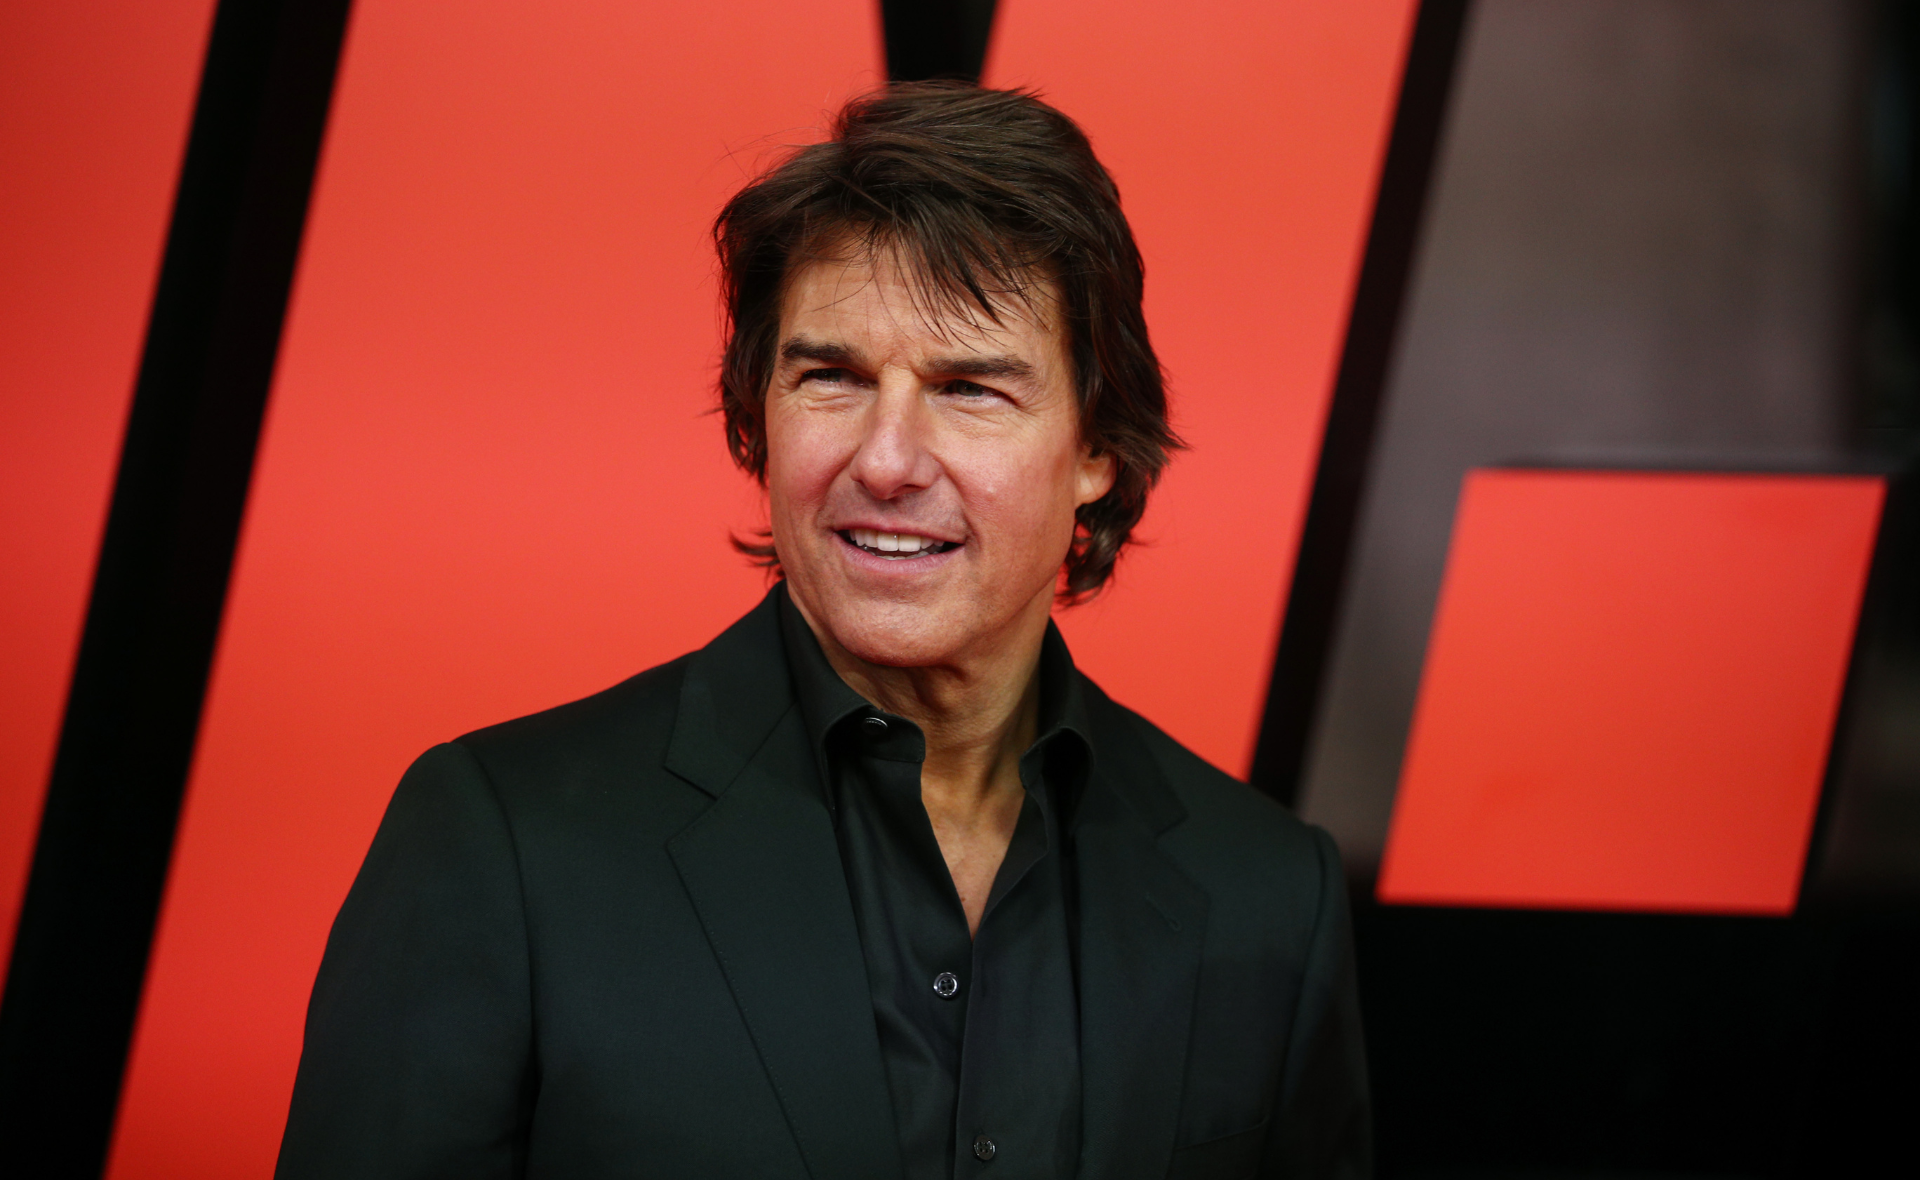 “He didn’t want any surprises”: Behind Tom Cruise’s alleged Mission Impossible red carpet rules